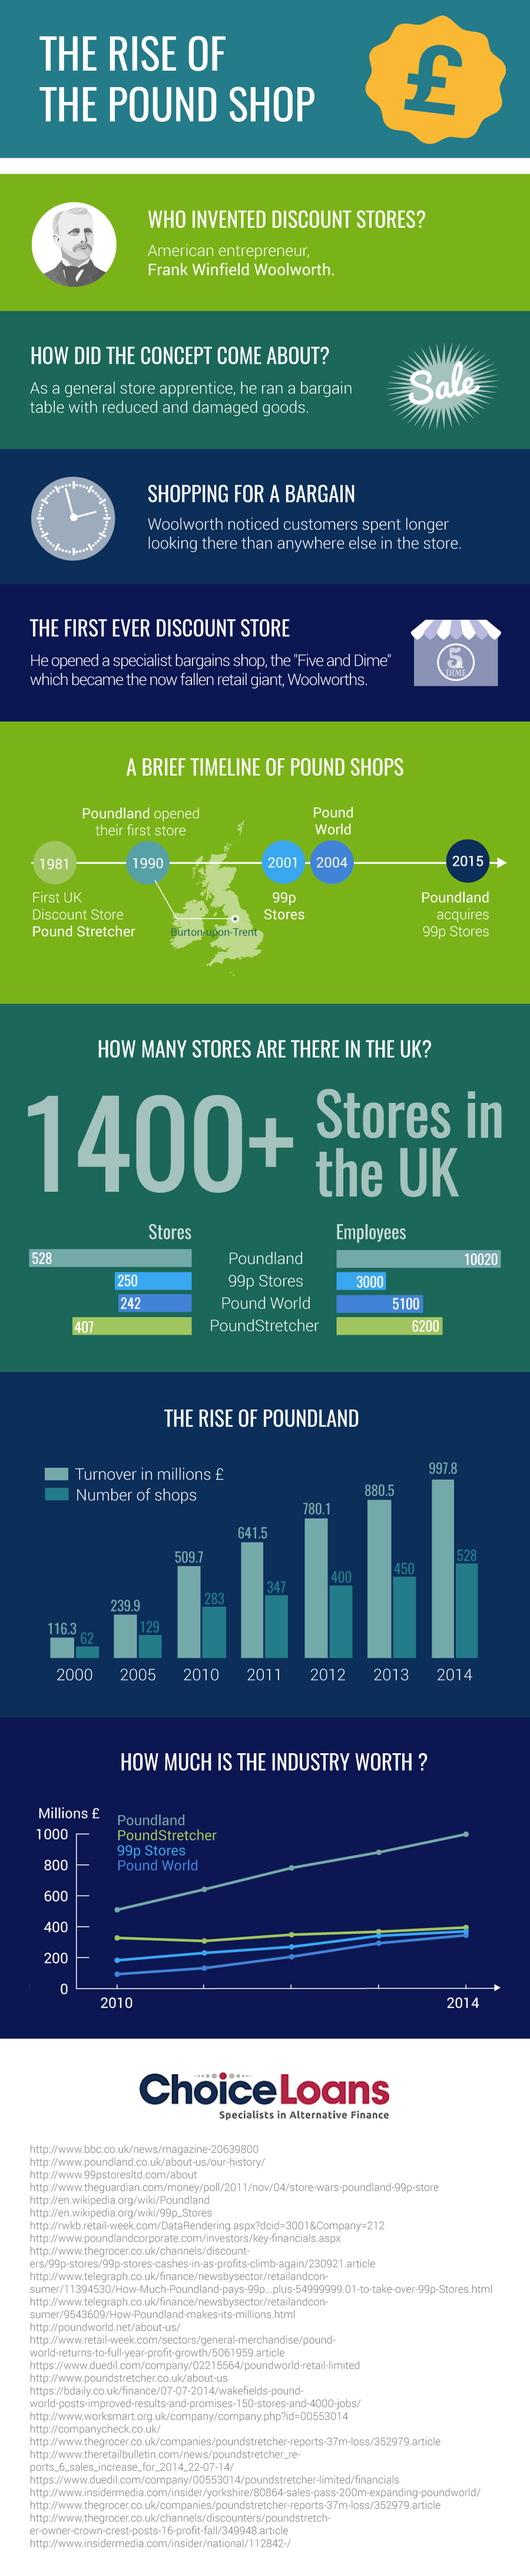 The Rise of the Pound Shop